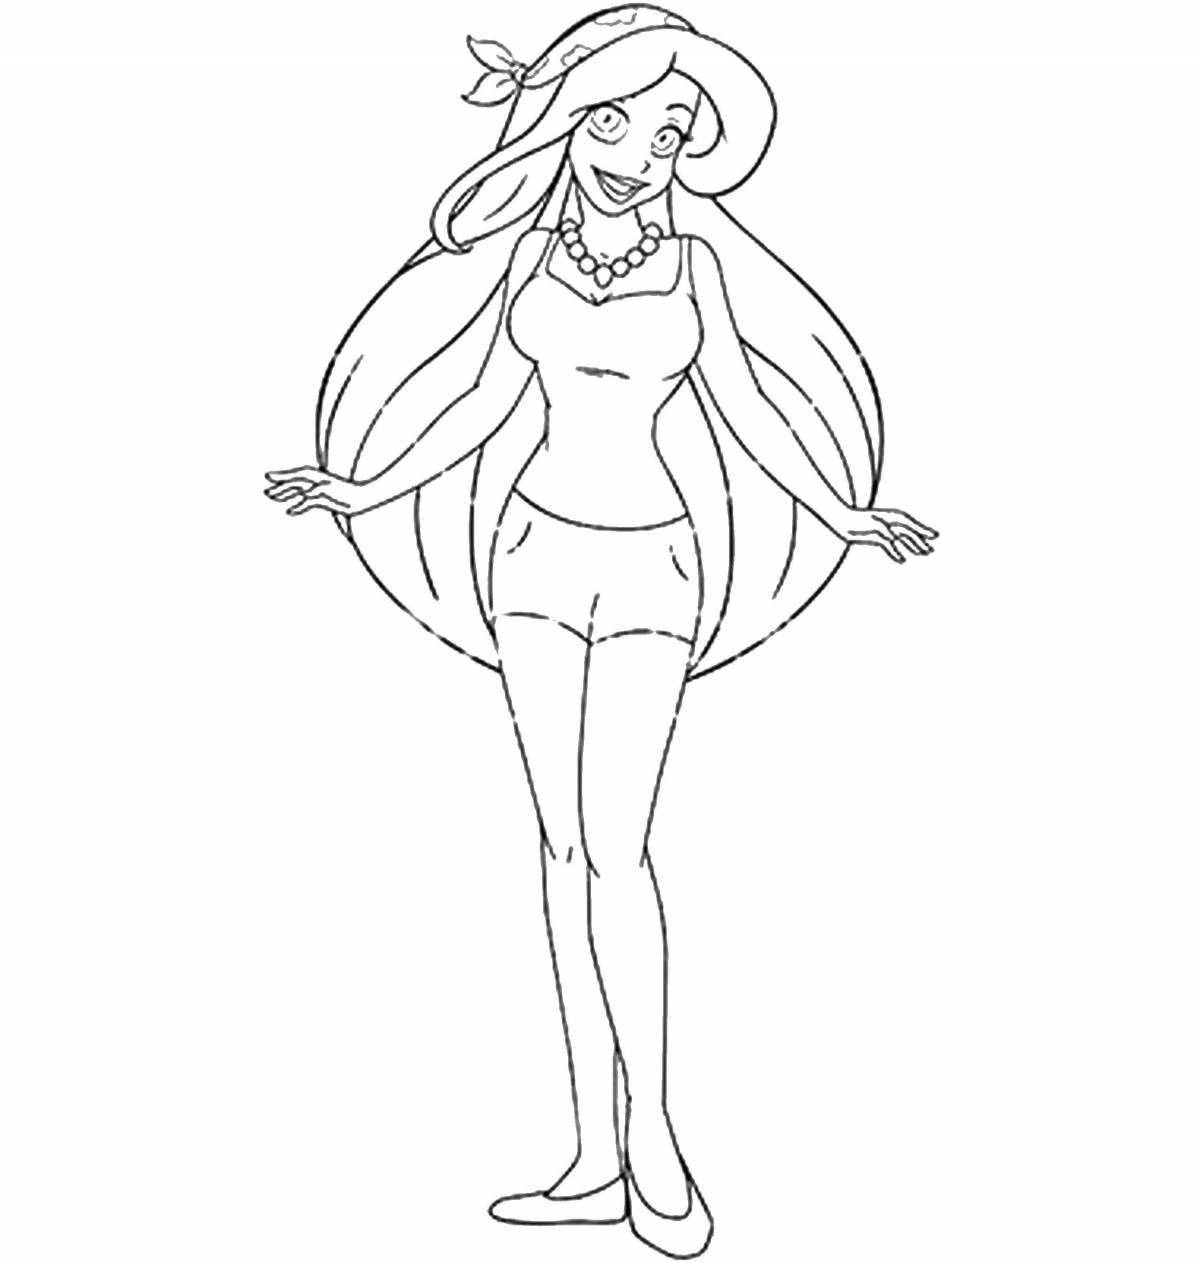 Coloring page energetic doll in a bathing suit